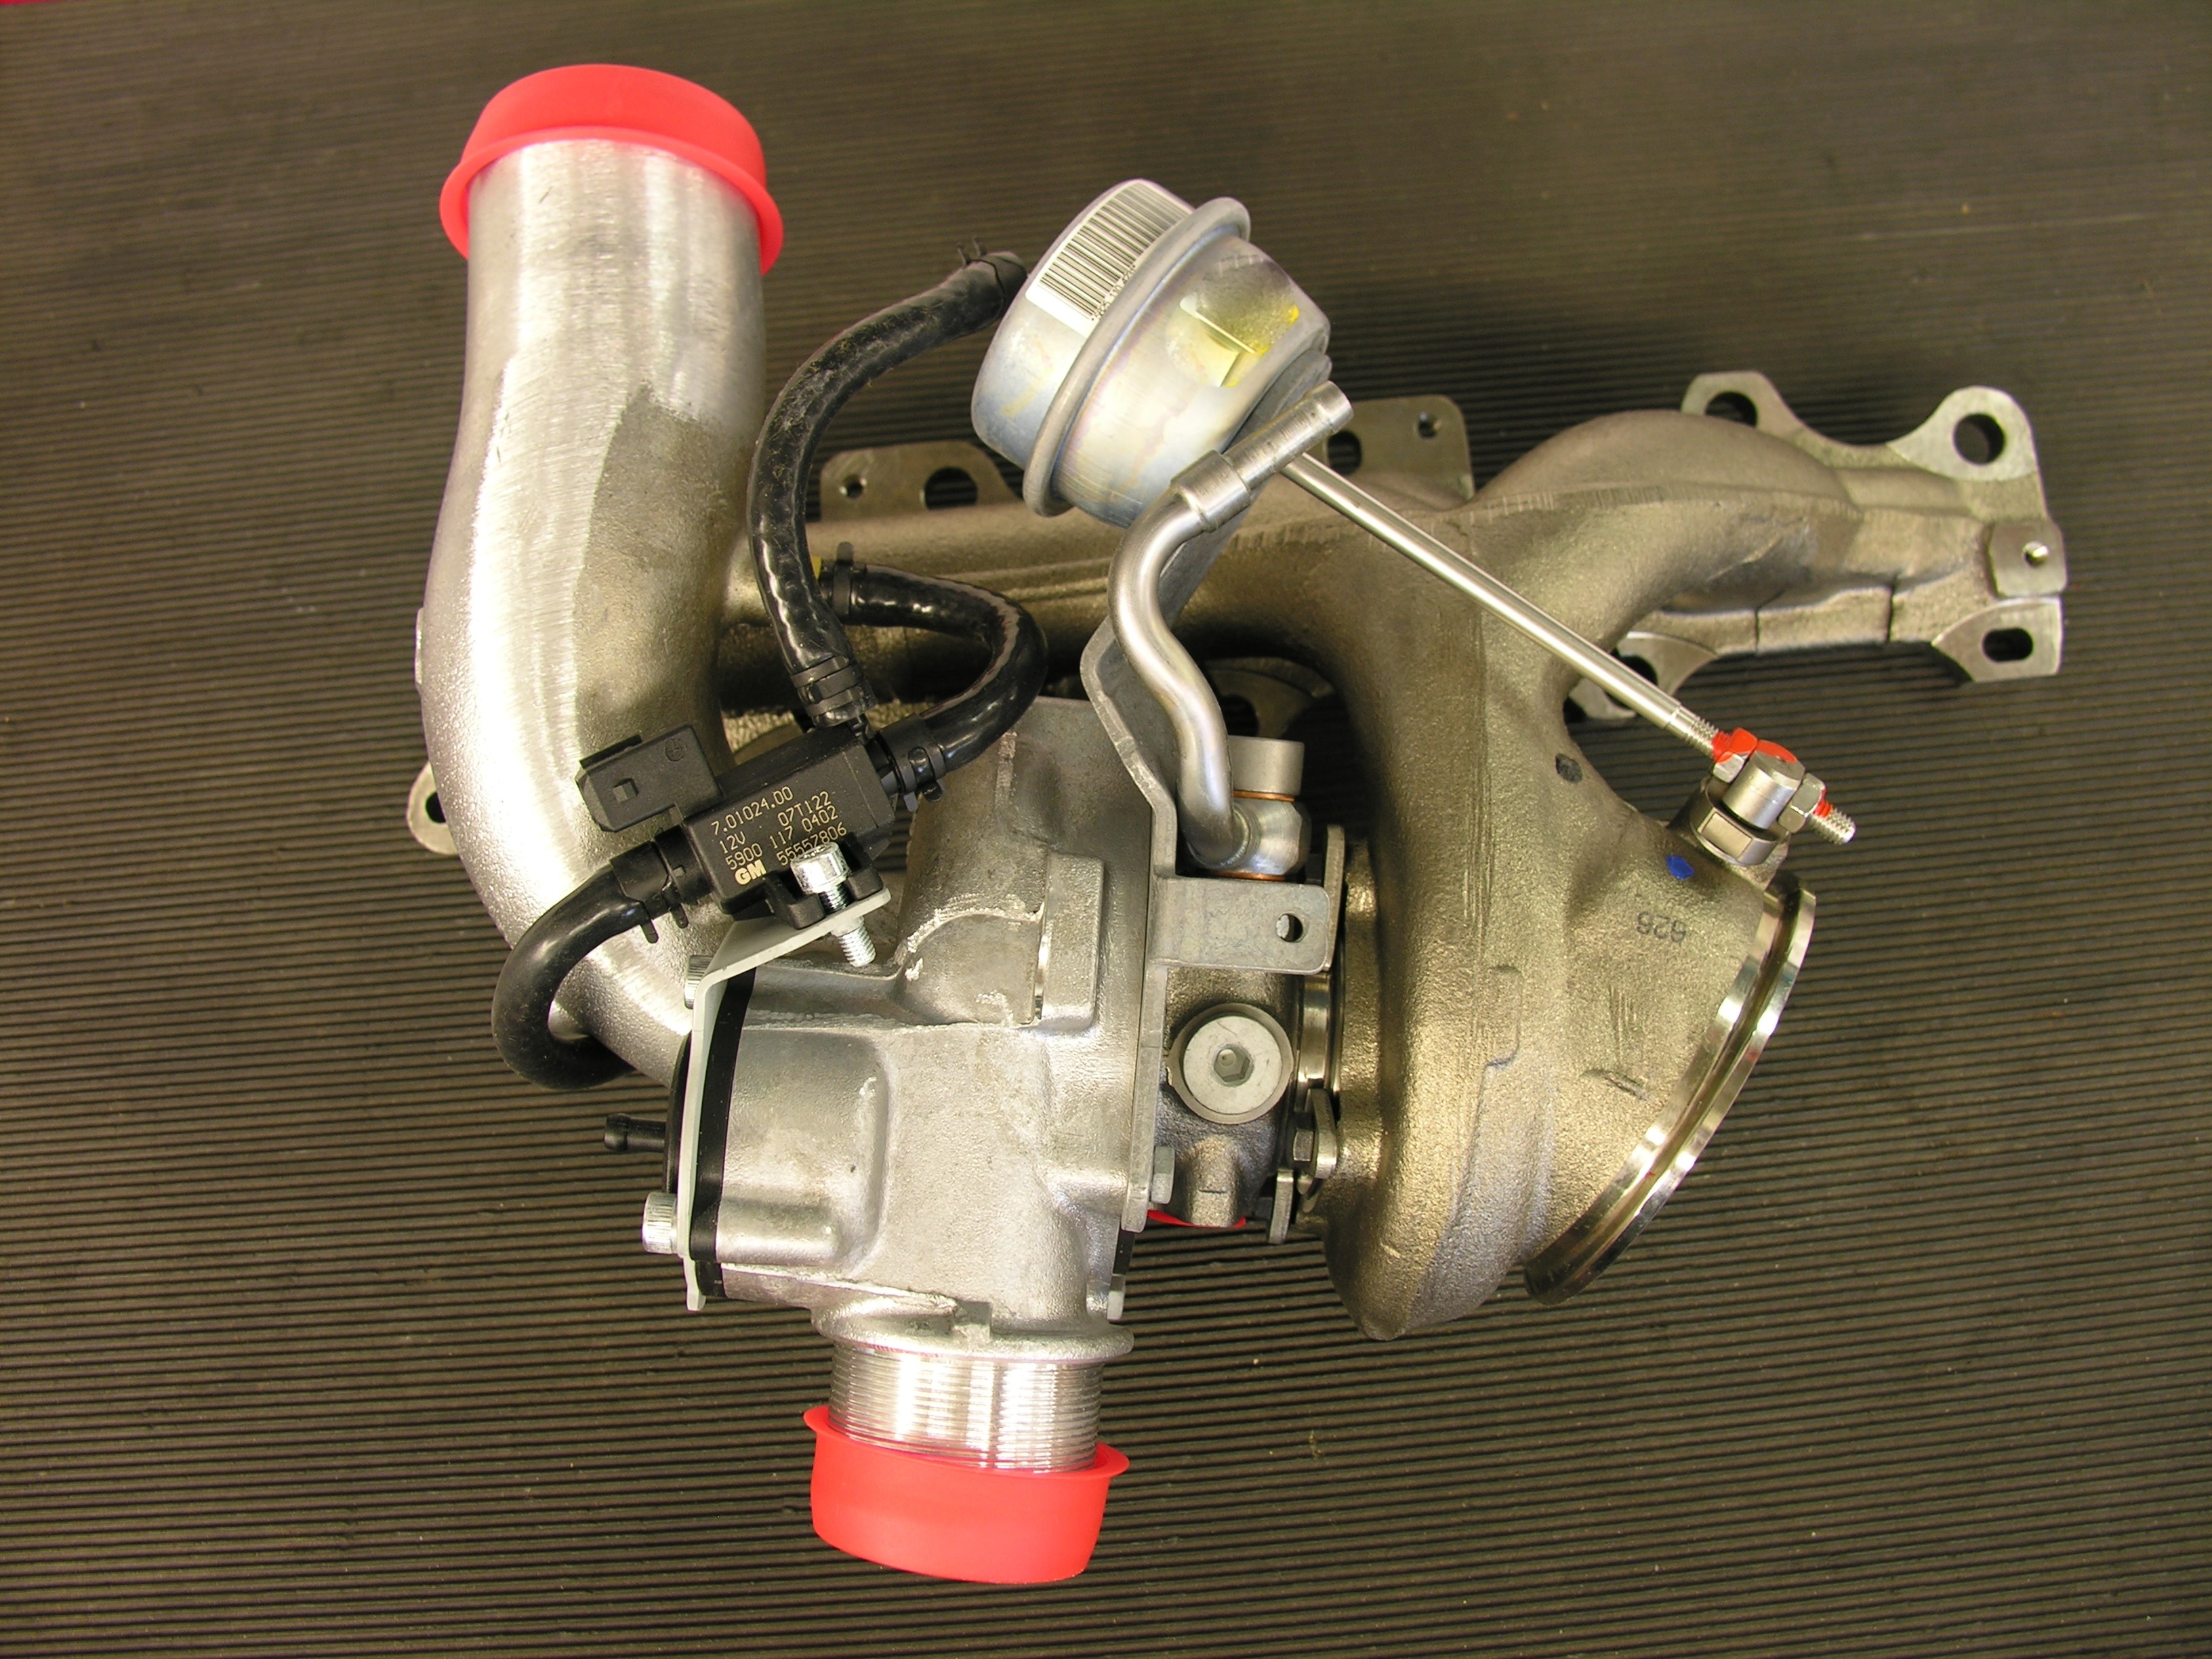 Manifold and turbocharger including Wastegate! from Z20LEL